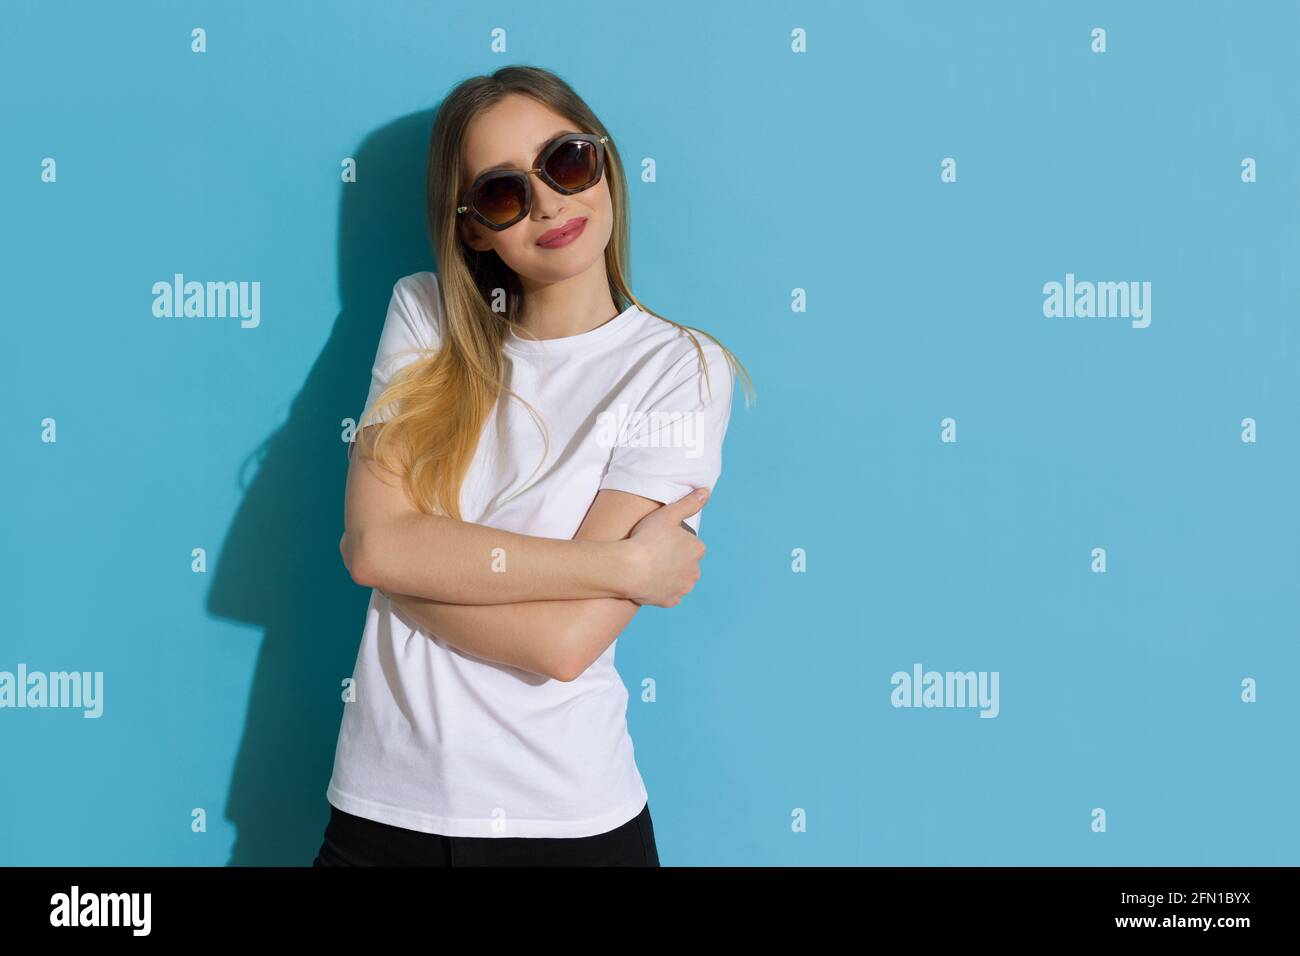 Happy young woman in white shirt and sunglasses is holding arms crossed, looking aside and smiling. Waist up studio shot on blue background. Stock Photo